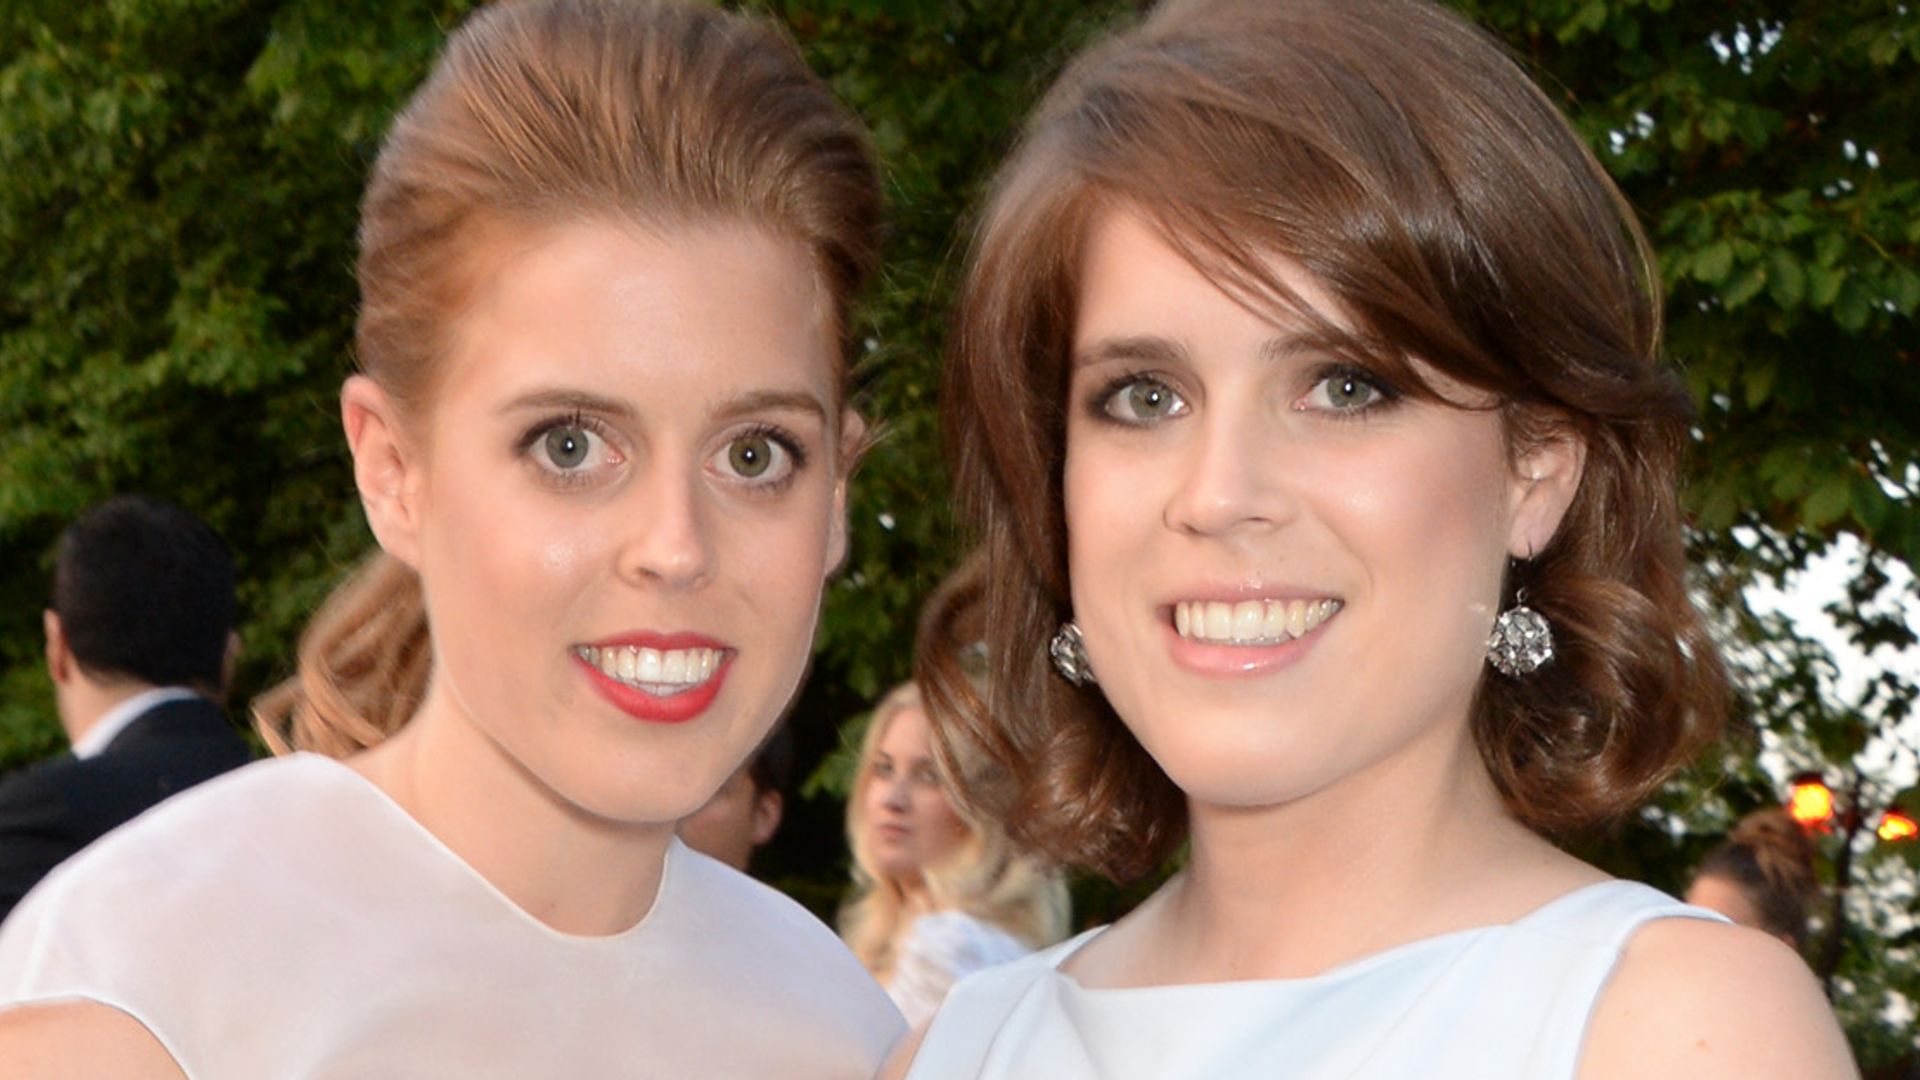 Princess Beatrice in a white dress and Princess Eugenie in a blue dress smiling outside at The Serpentine Gallery Summer Party in 2014